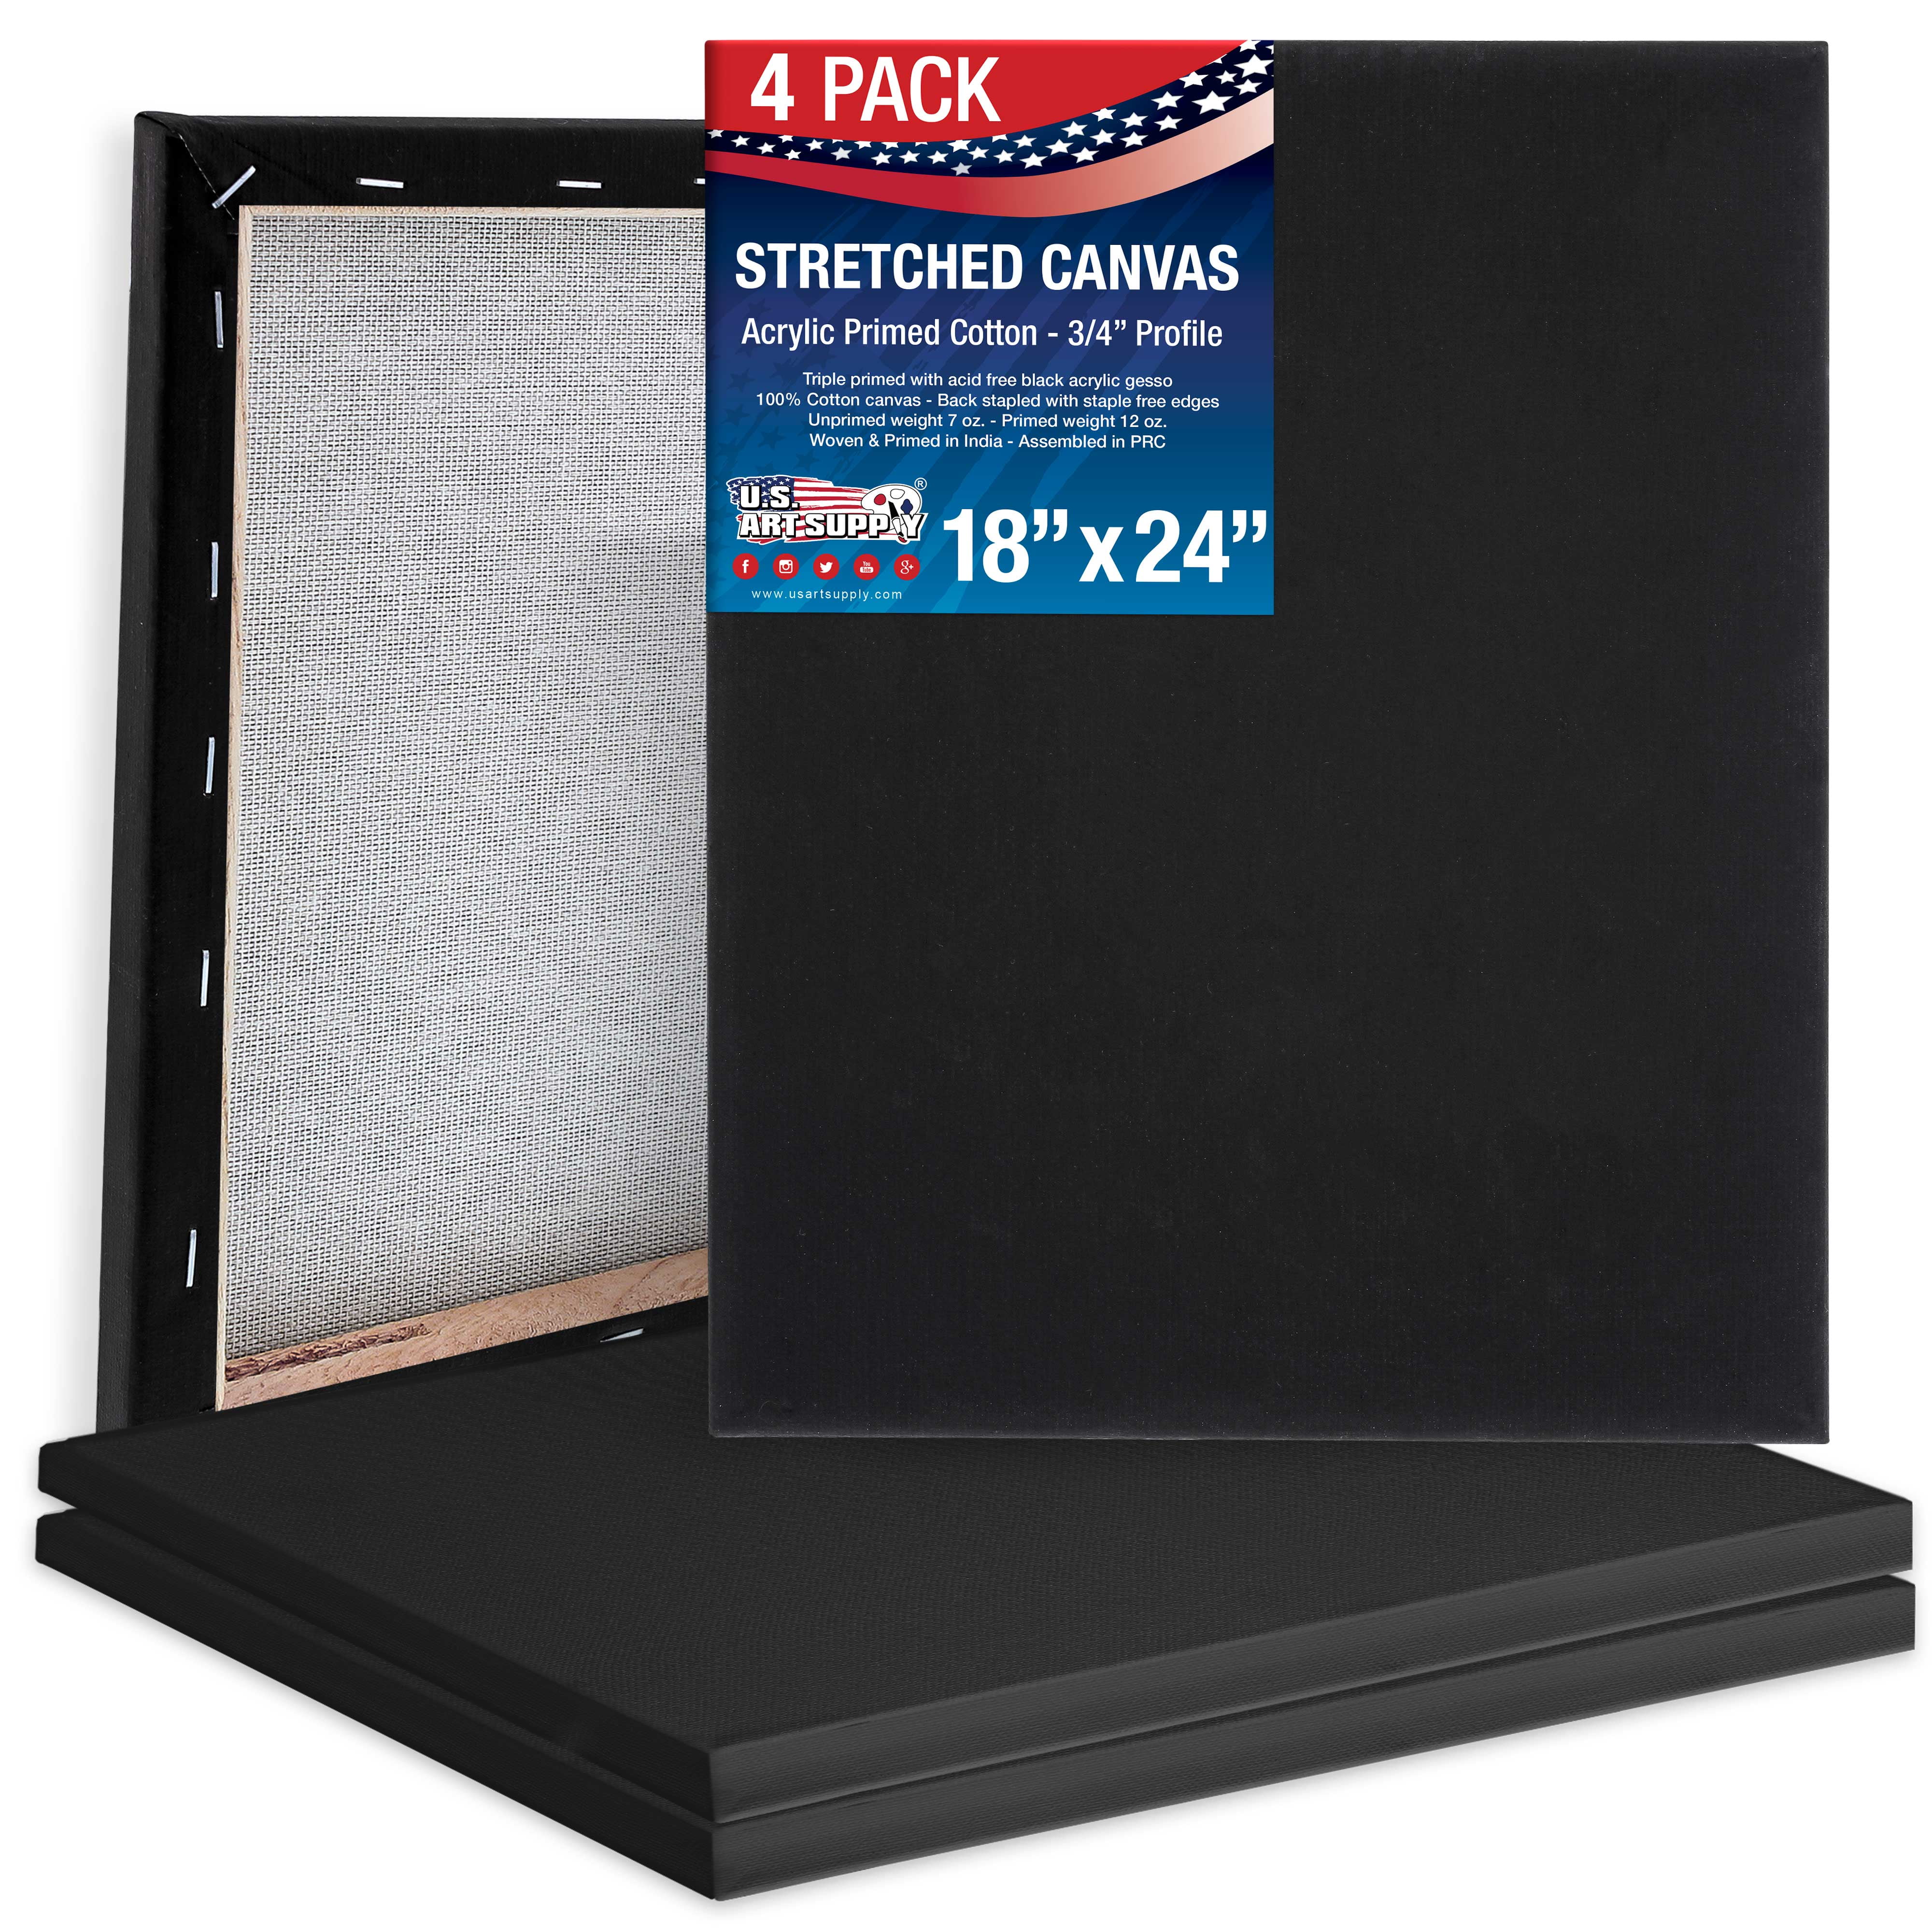  RHBLME 12 Pack Black Canvases for Painting, 8 x 12 Inch Blank  Black Canvas, 100% Cotton Stretched Canvas, 3/5 Inch Profile of Super Value  Pack for Acrylics, Oils & Other Painting Media